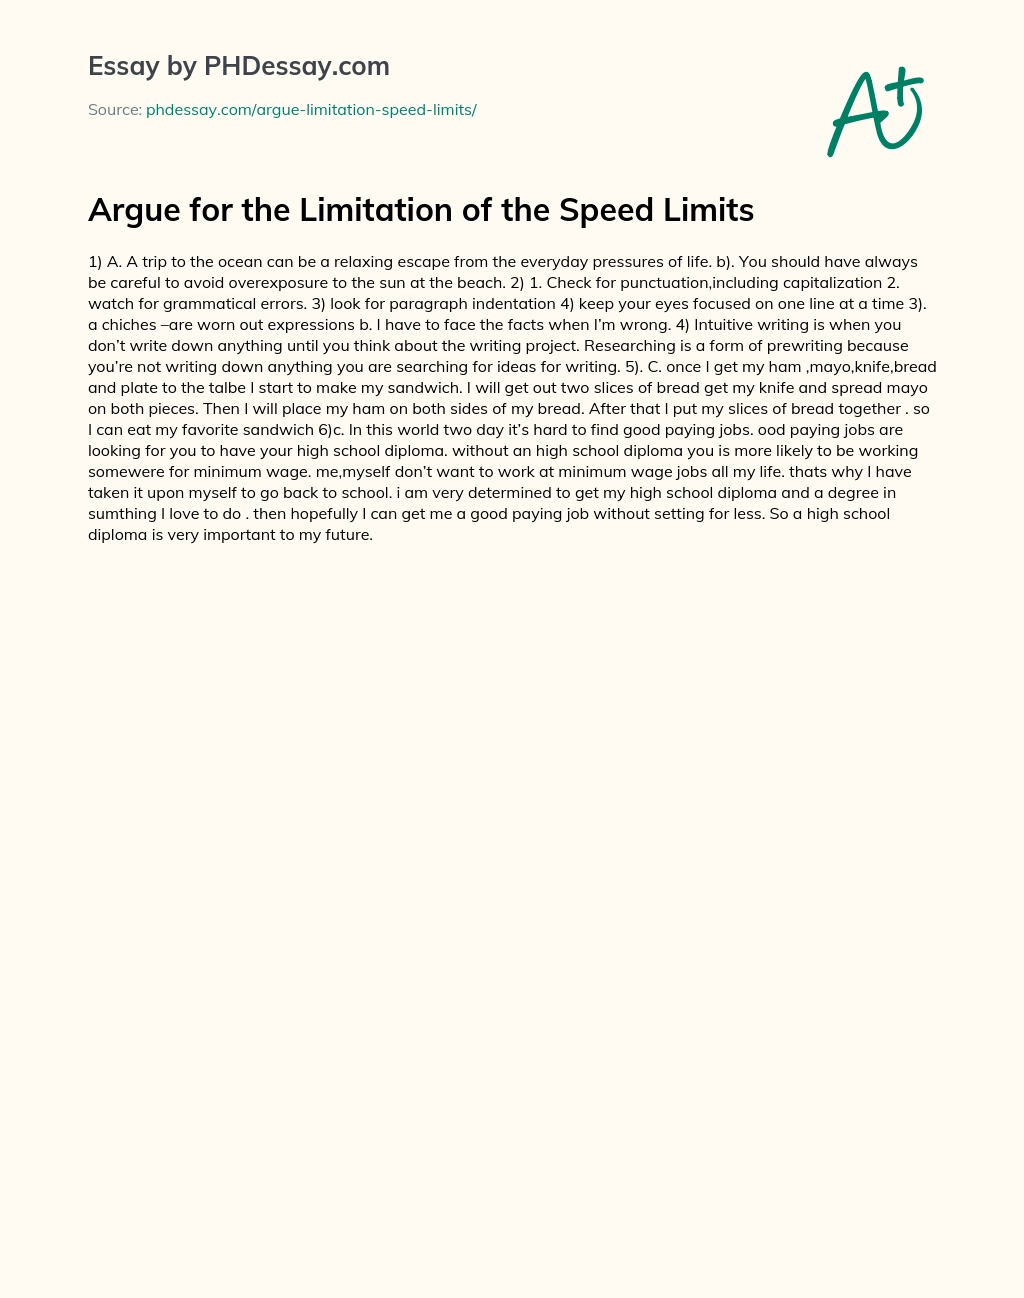 Argue for the Limitation of the Speed Limits essay